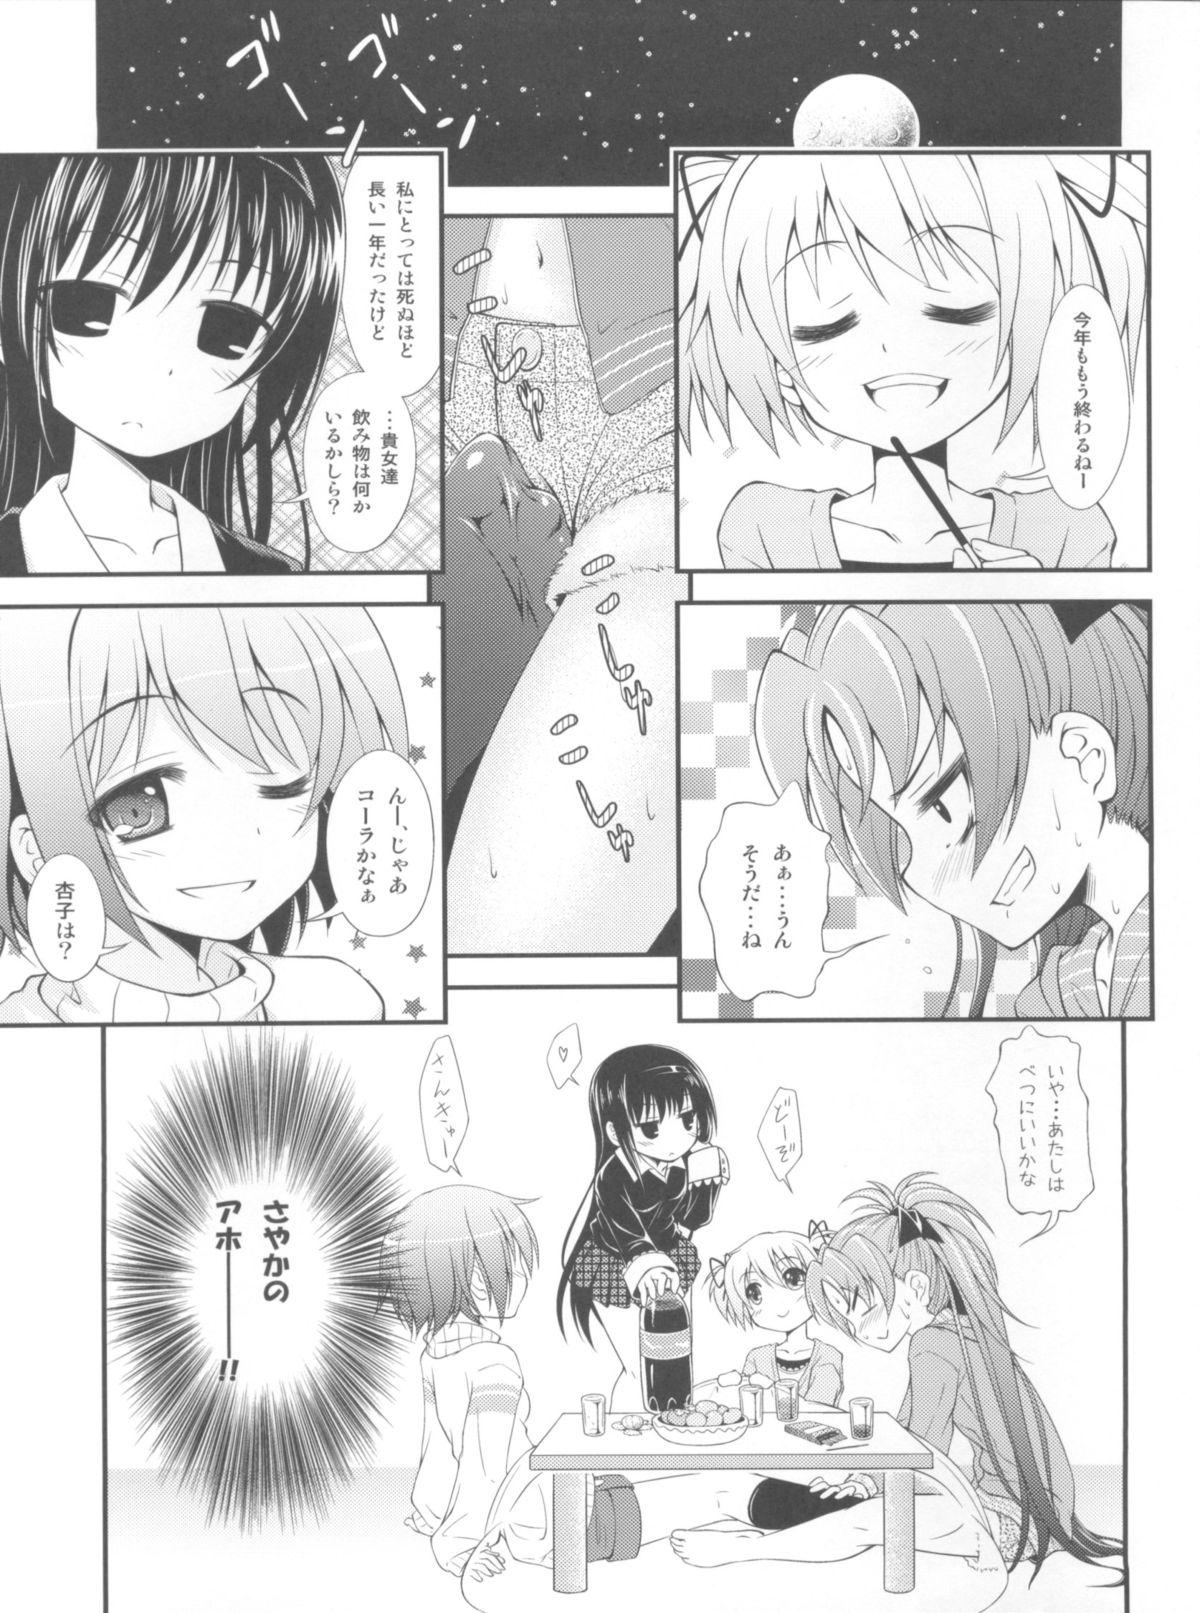 Assfucking Lovely Girls' Lily vol.3 - Puella magi madoka magica Anal Creampie - Page 4